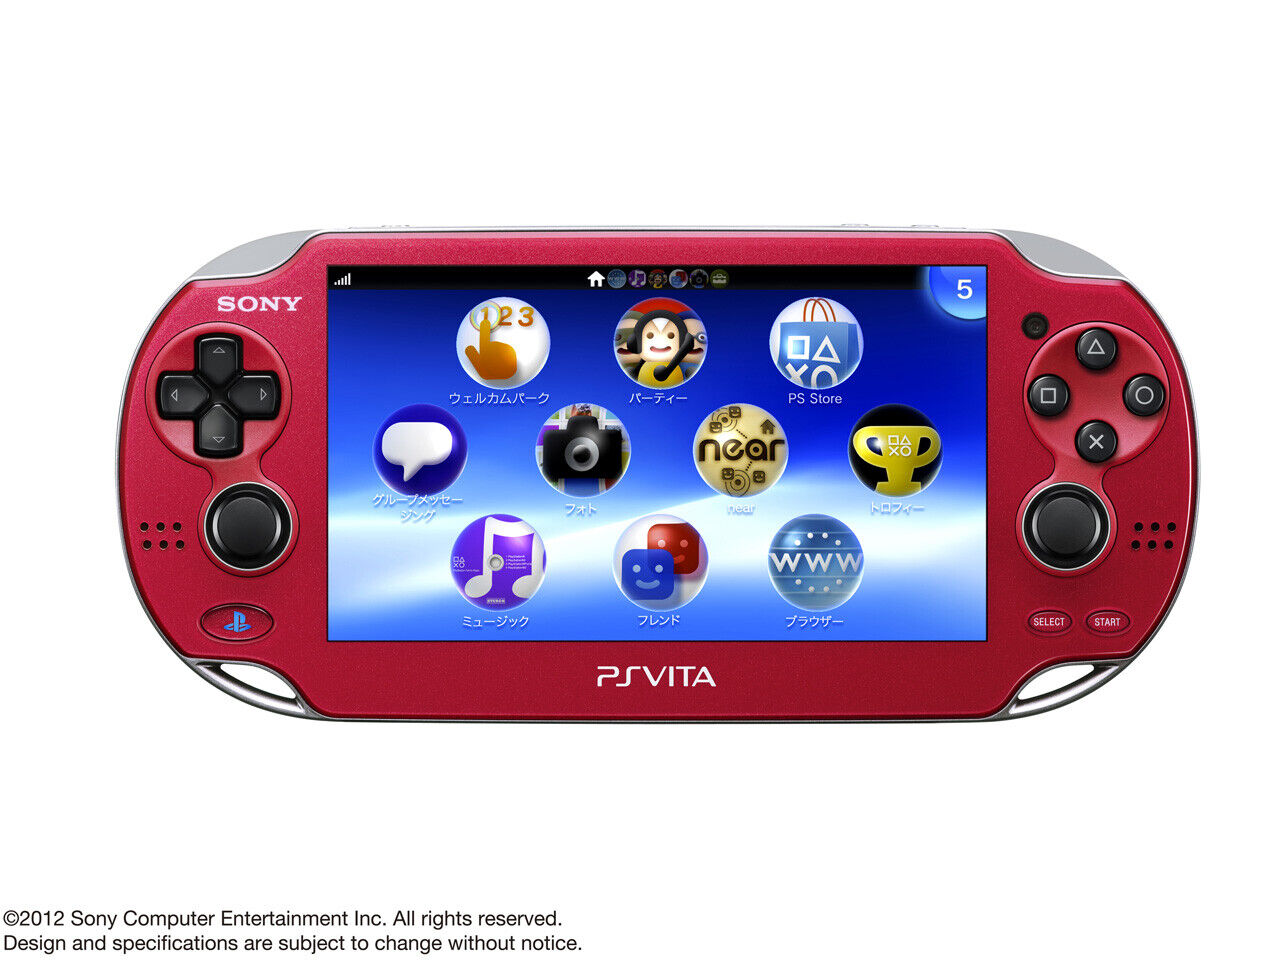 USED PS Playstation vita Wi-Fi model Cosmic Red PCH-1000 ZA03 only 